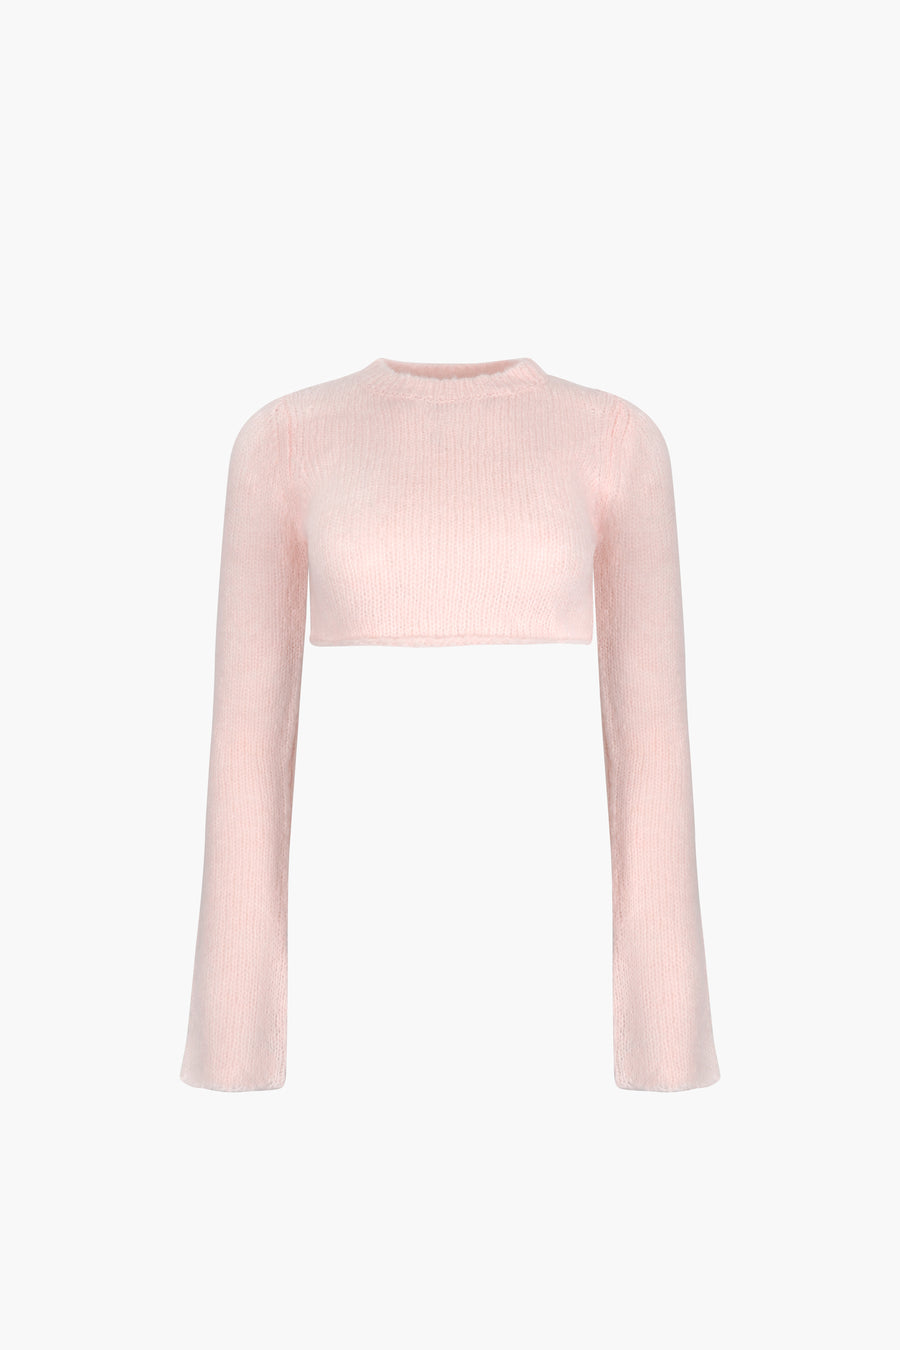 Cropped knit sweater in blush pink